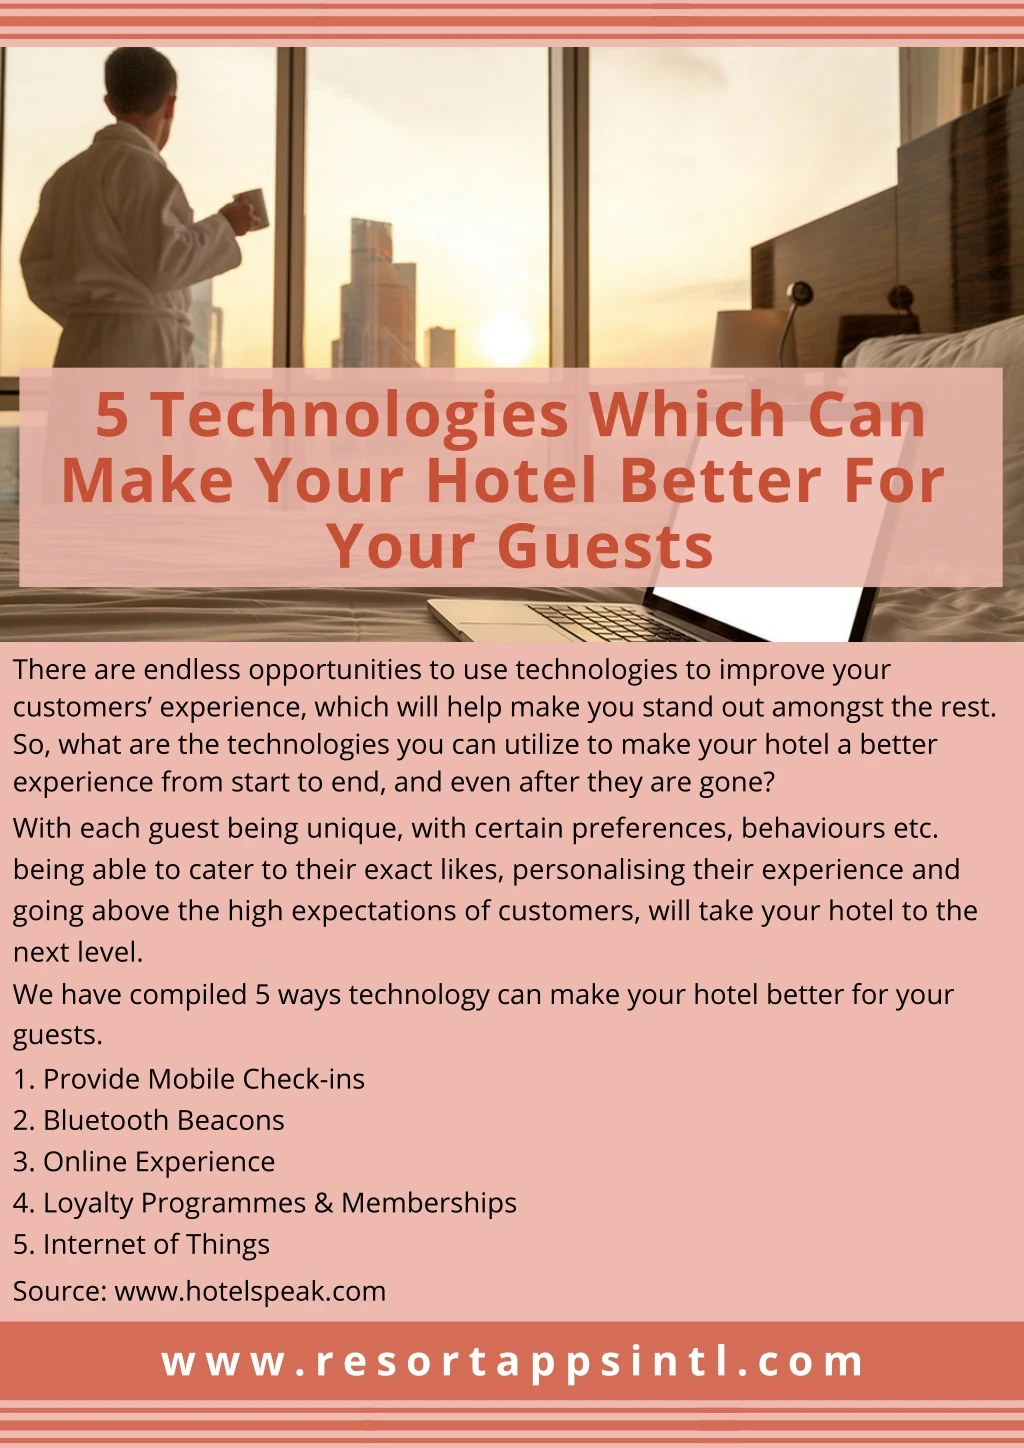 5 technologies which can make your hotel better